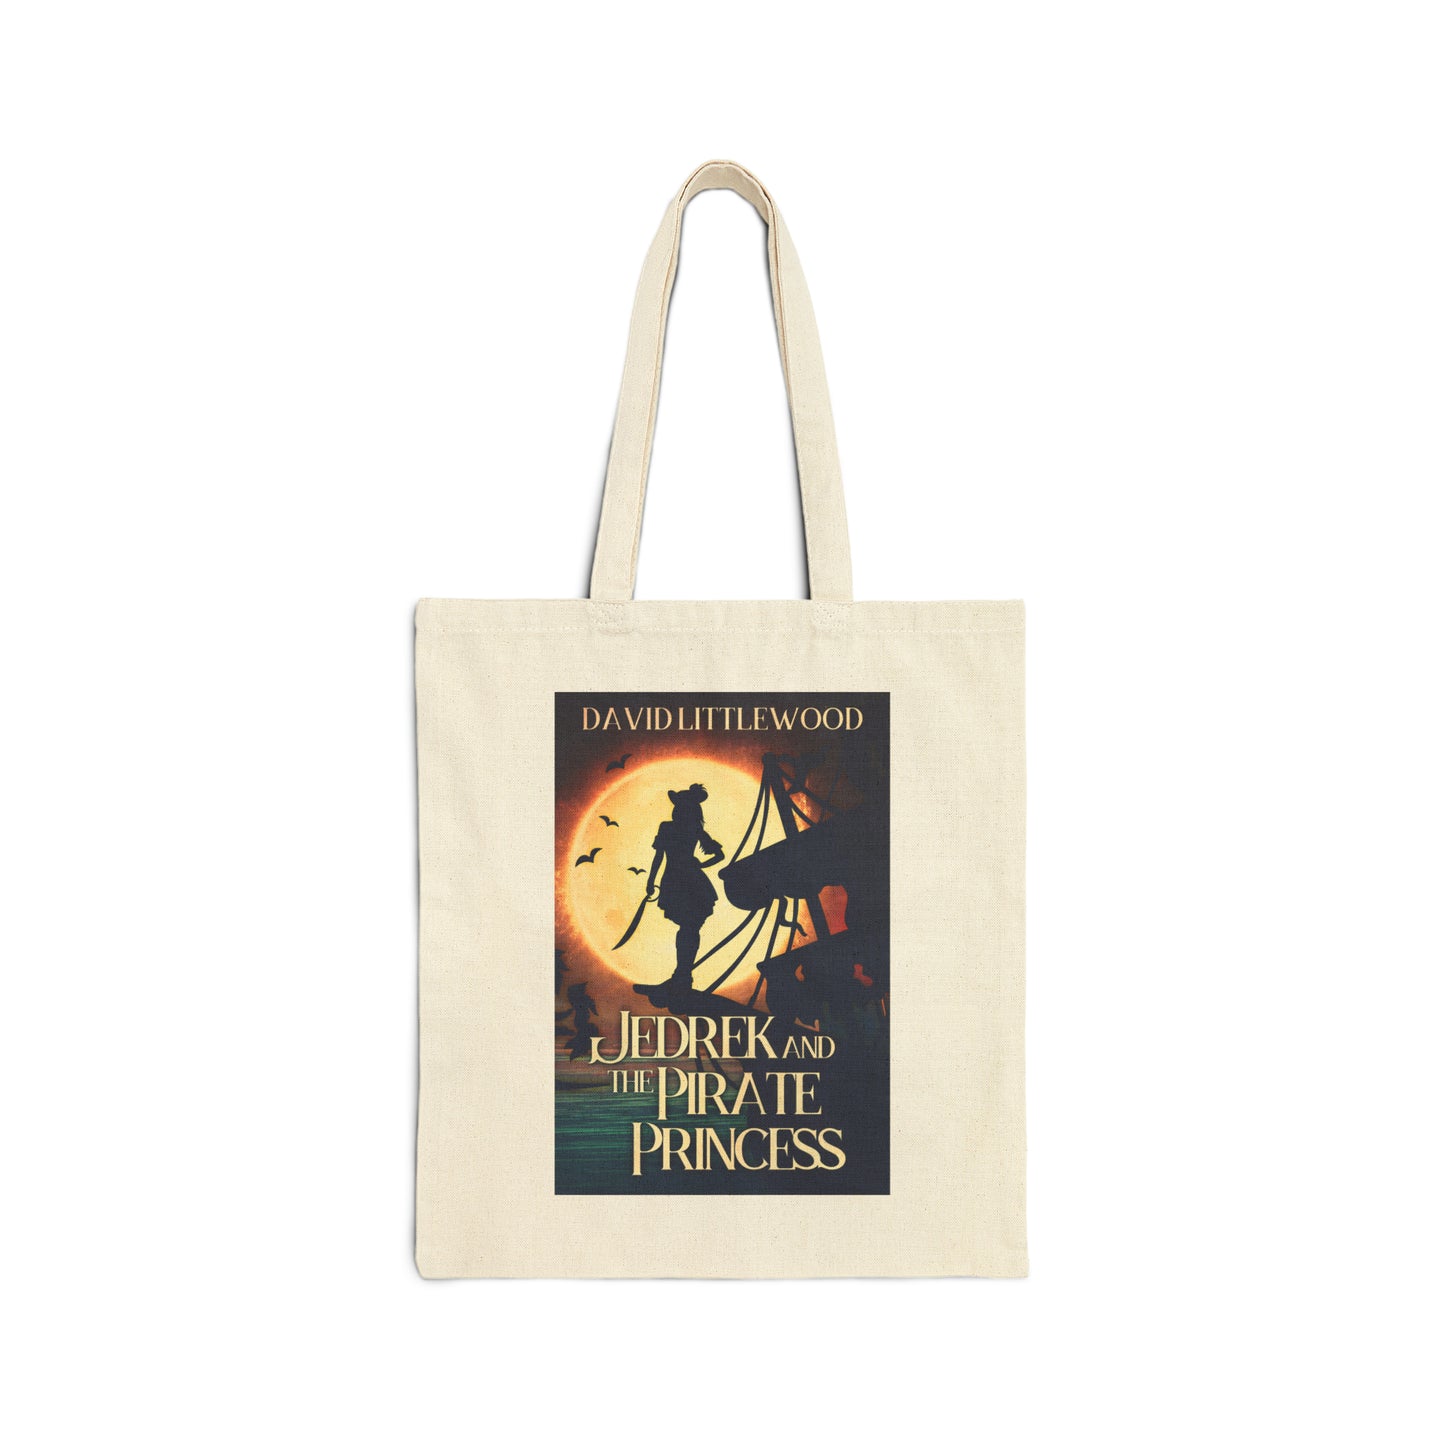 Jedrek And The Pirate Princess - Cotton Canvas Tote Bag